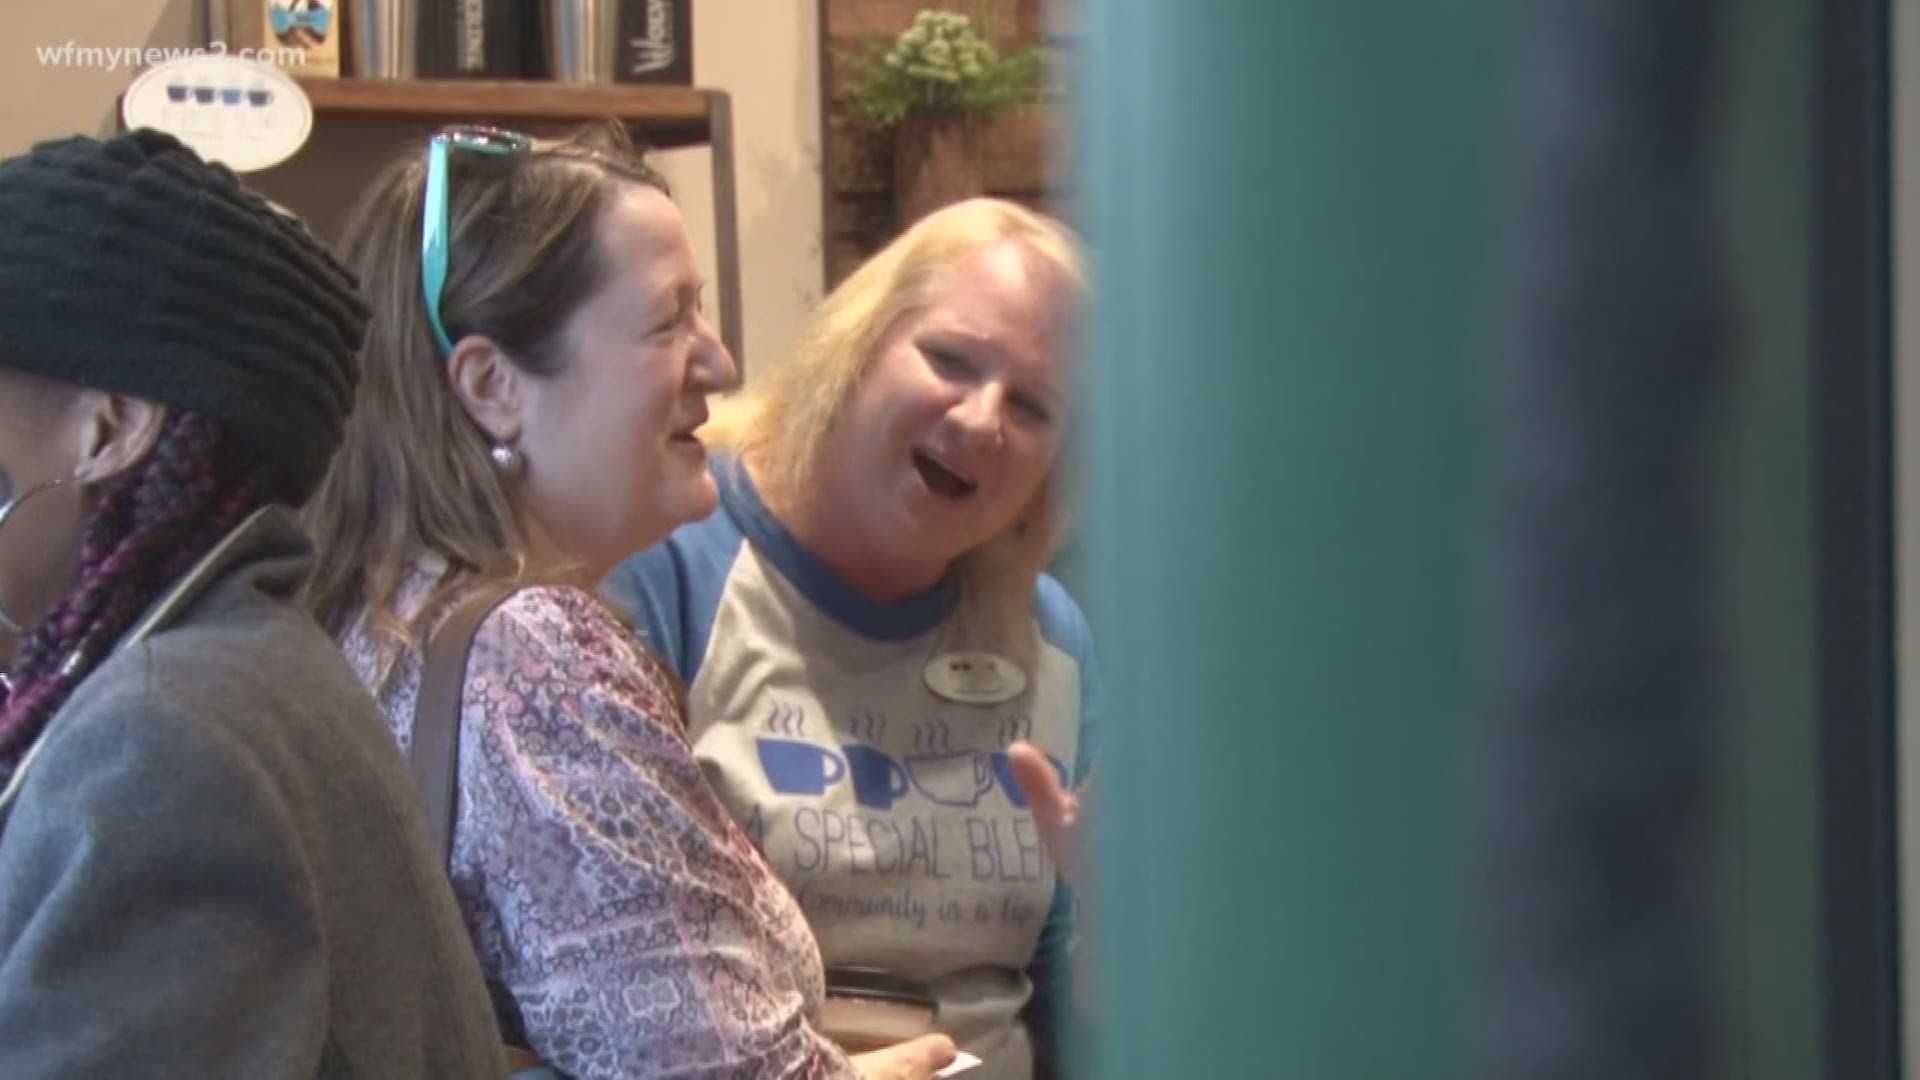 "Special Blends" In Greensboro Hires People With Disabilities